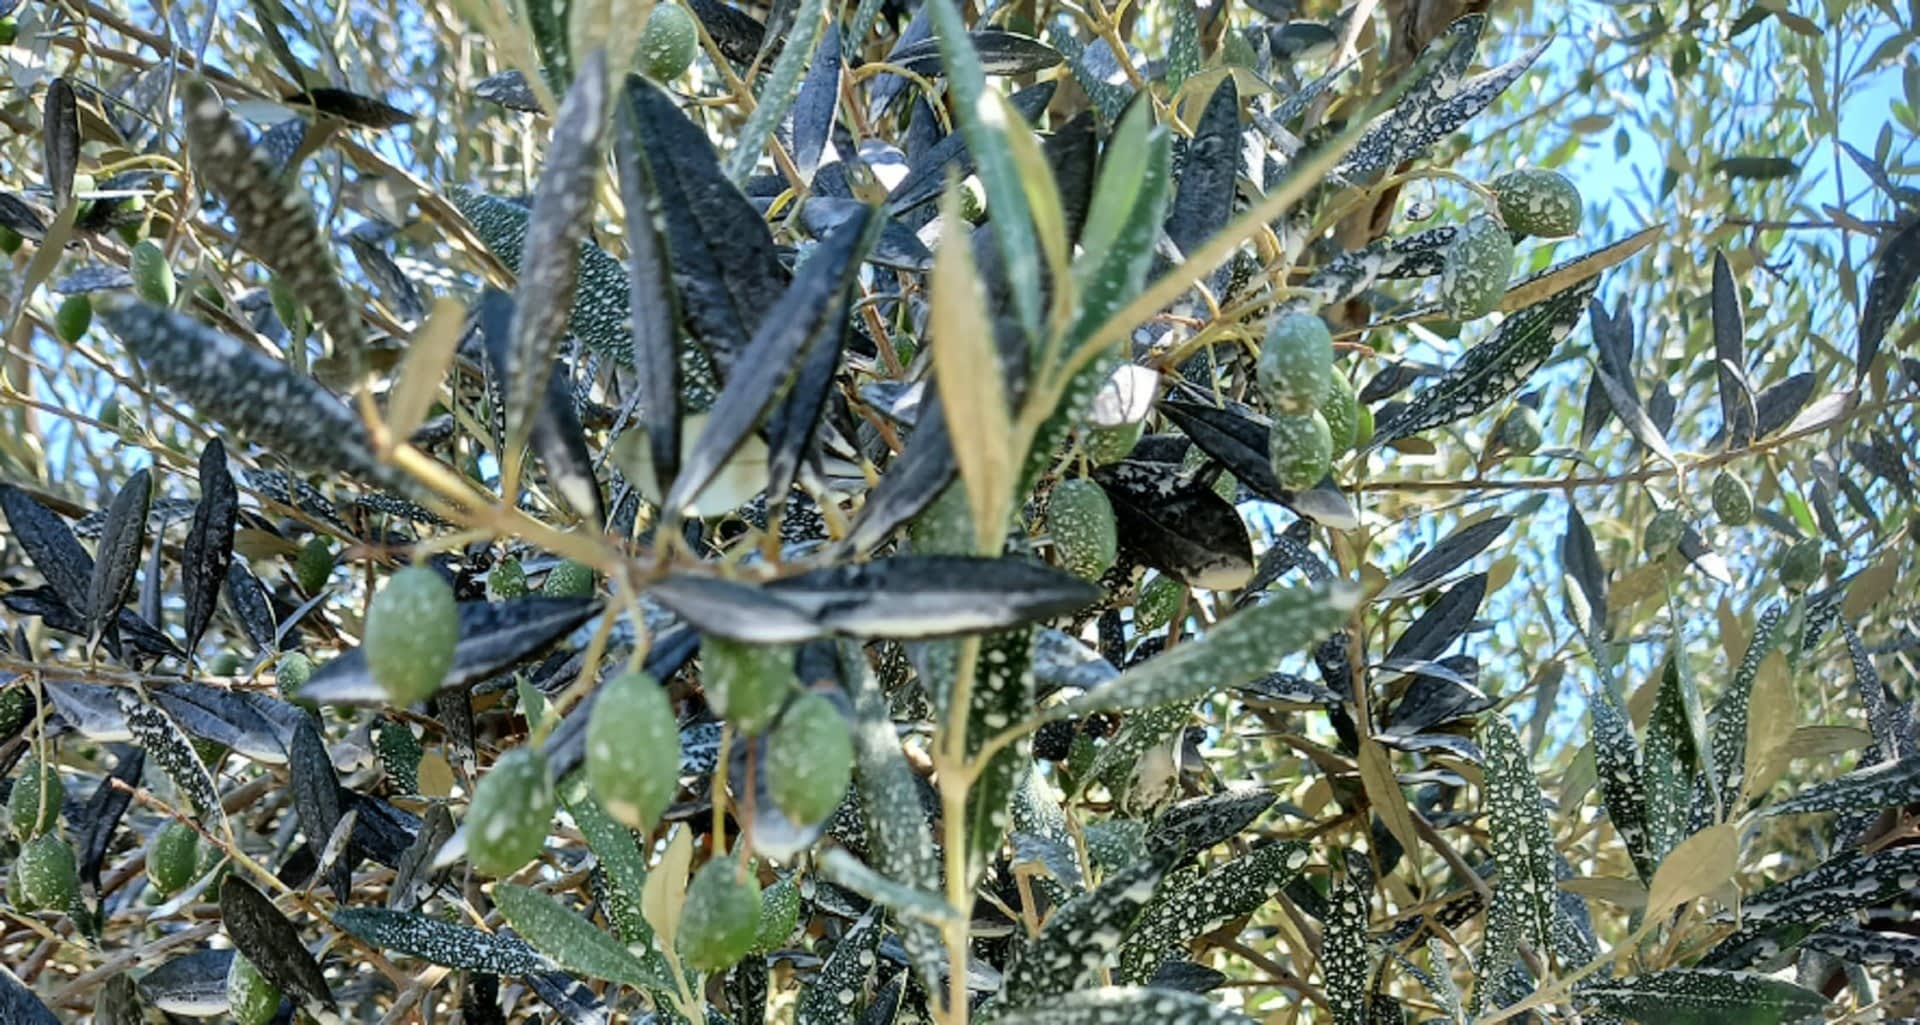 production-croatian-olive-grower-innovations-to-overcome-drowt-pests-olive-oil-times